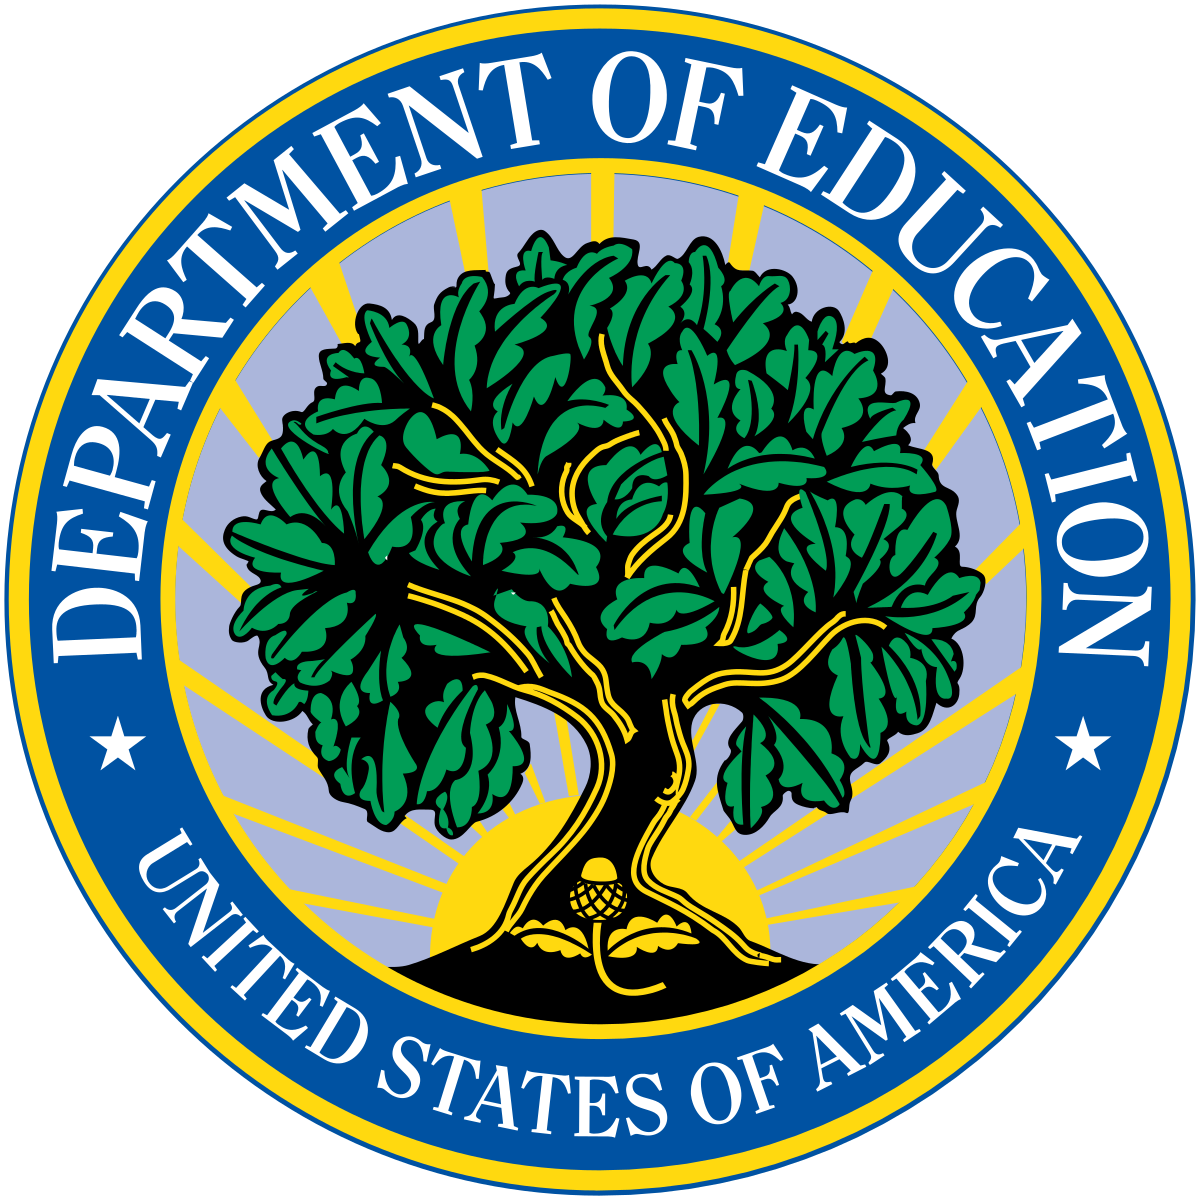 PK7j377qRmxbMMrApist_Seal_of_the_United_States_Department_of_Education.svg